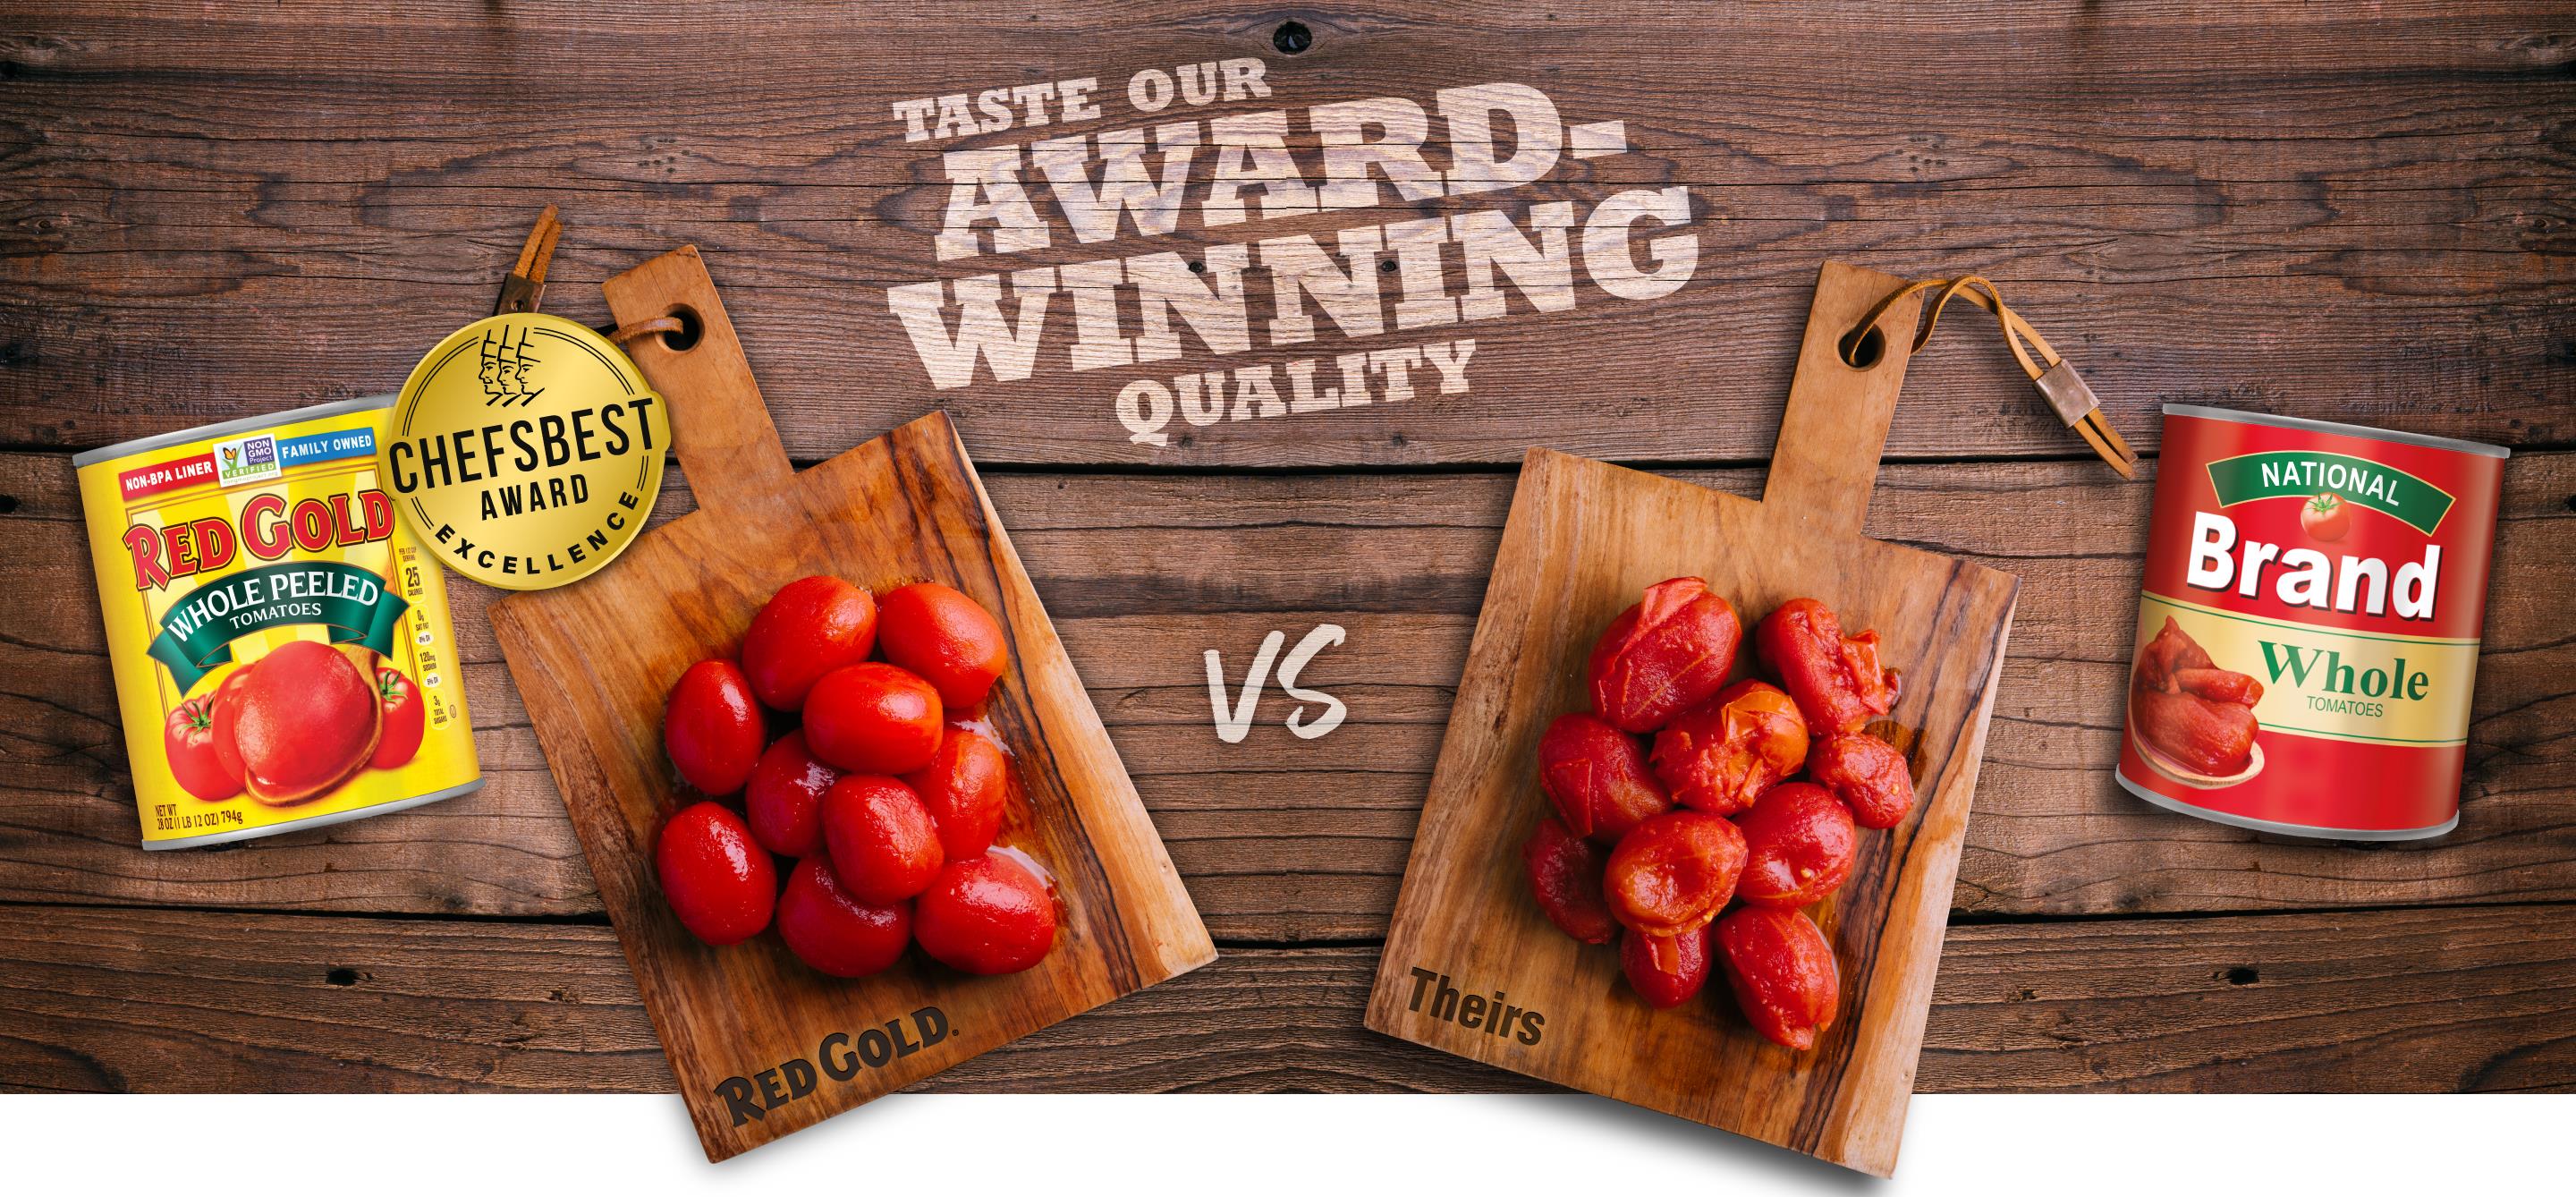 Image of Red Gold Tomatoes whole peeled comparison with Chef's Best Award Taste Our Award Winning Tomatoes